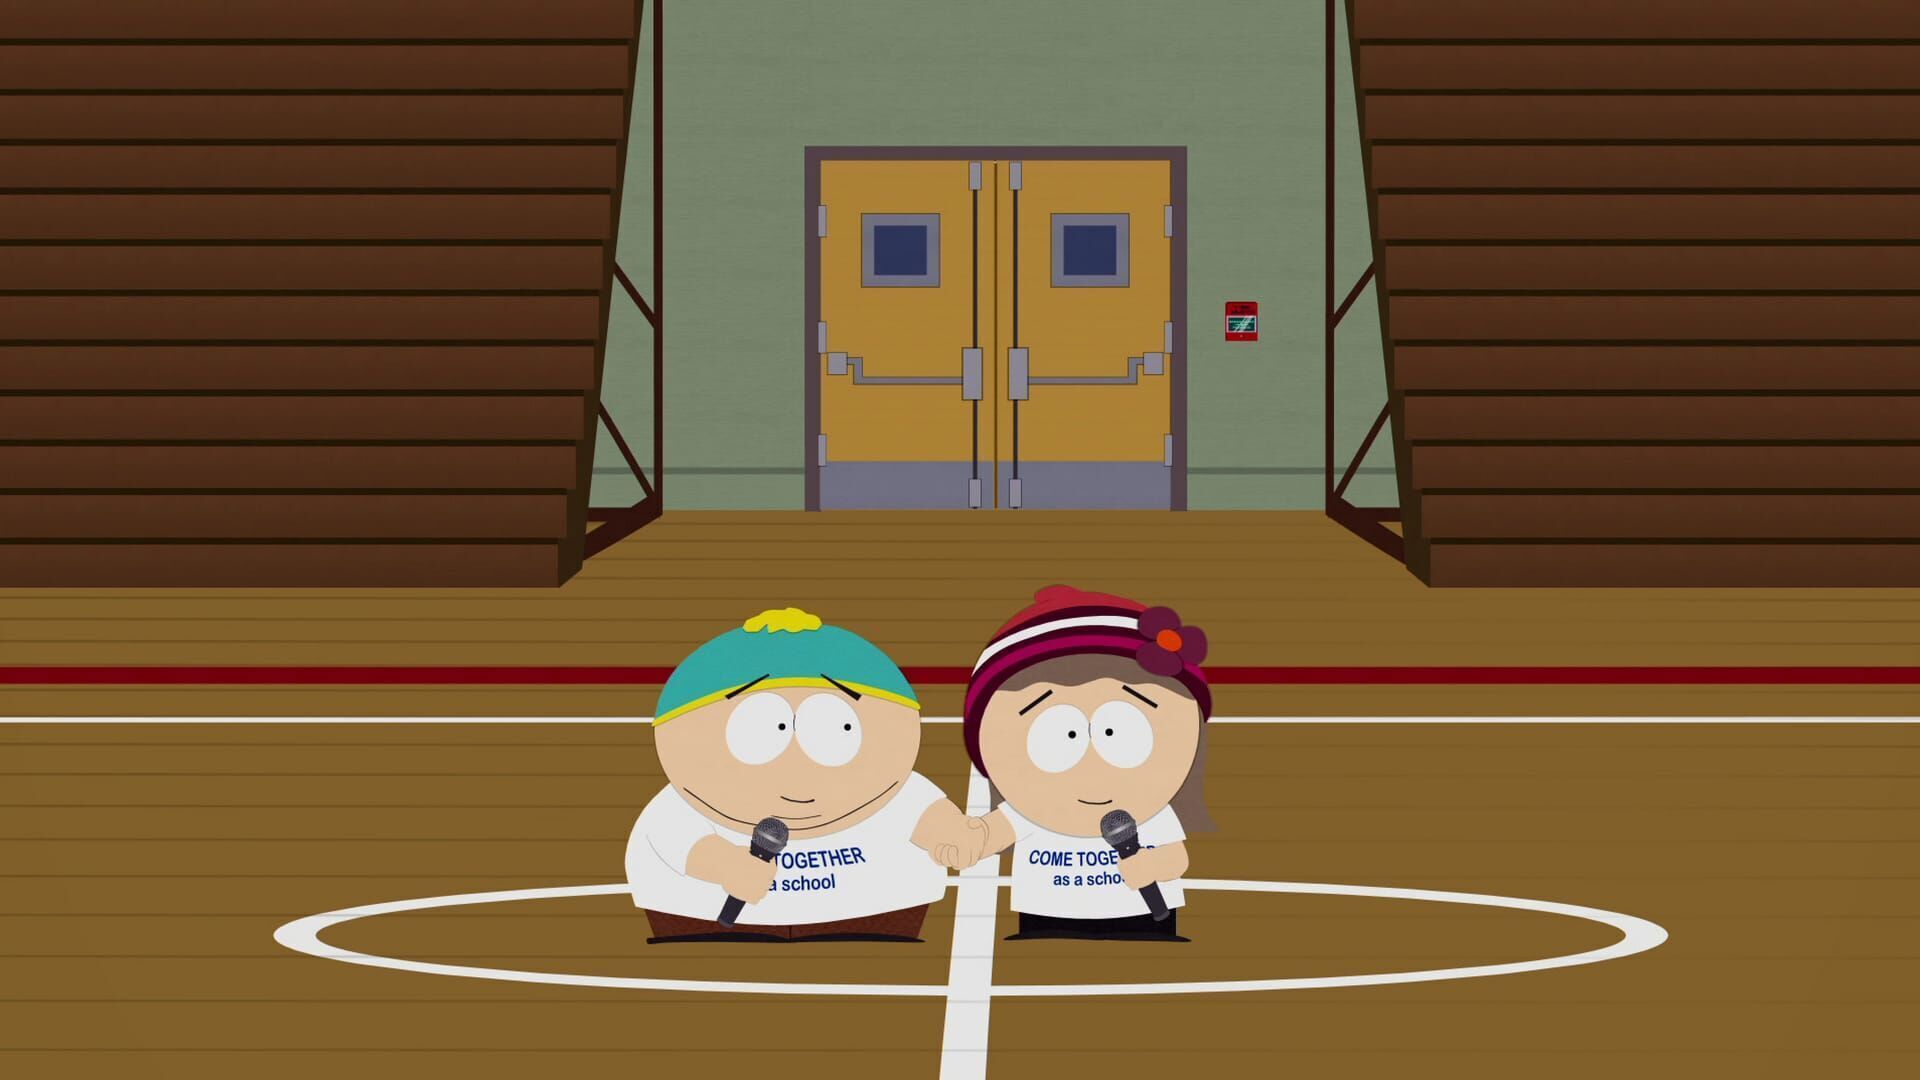 South Park - Douche and a Danish